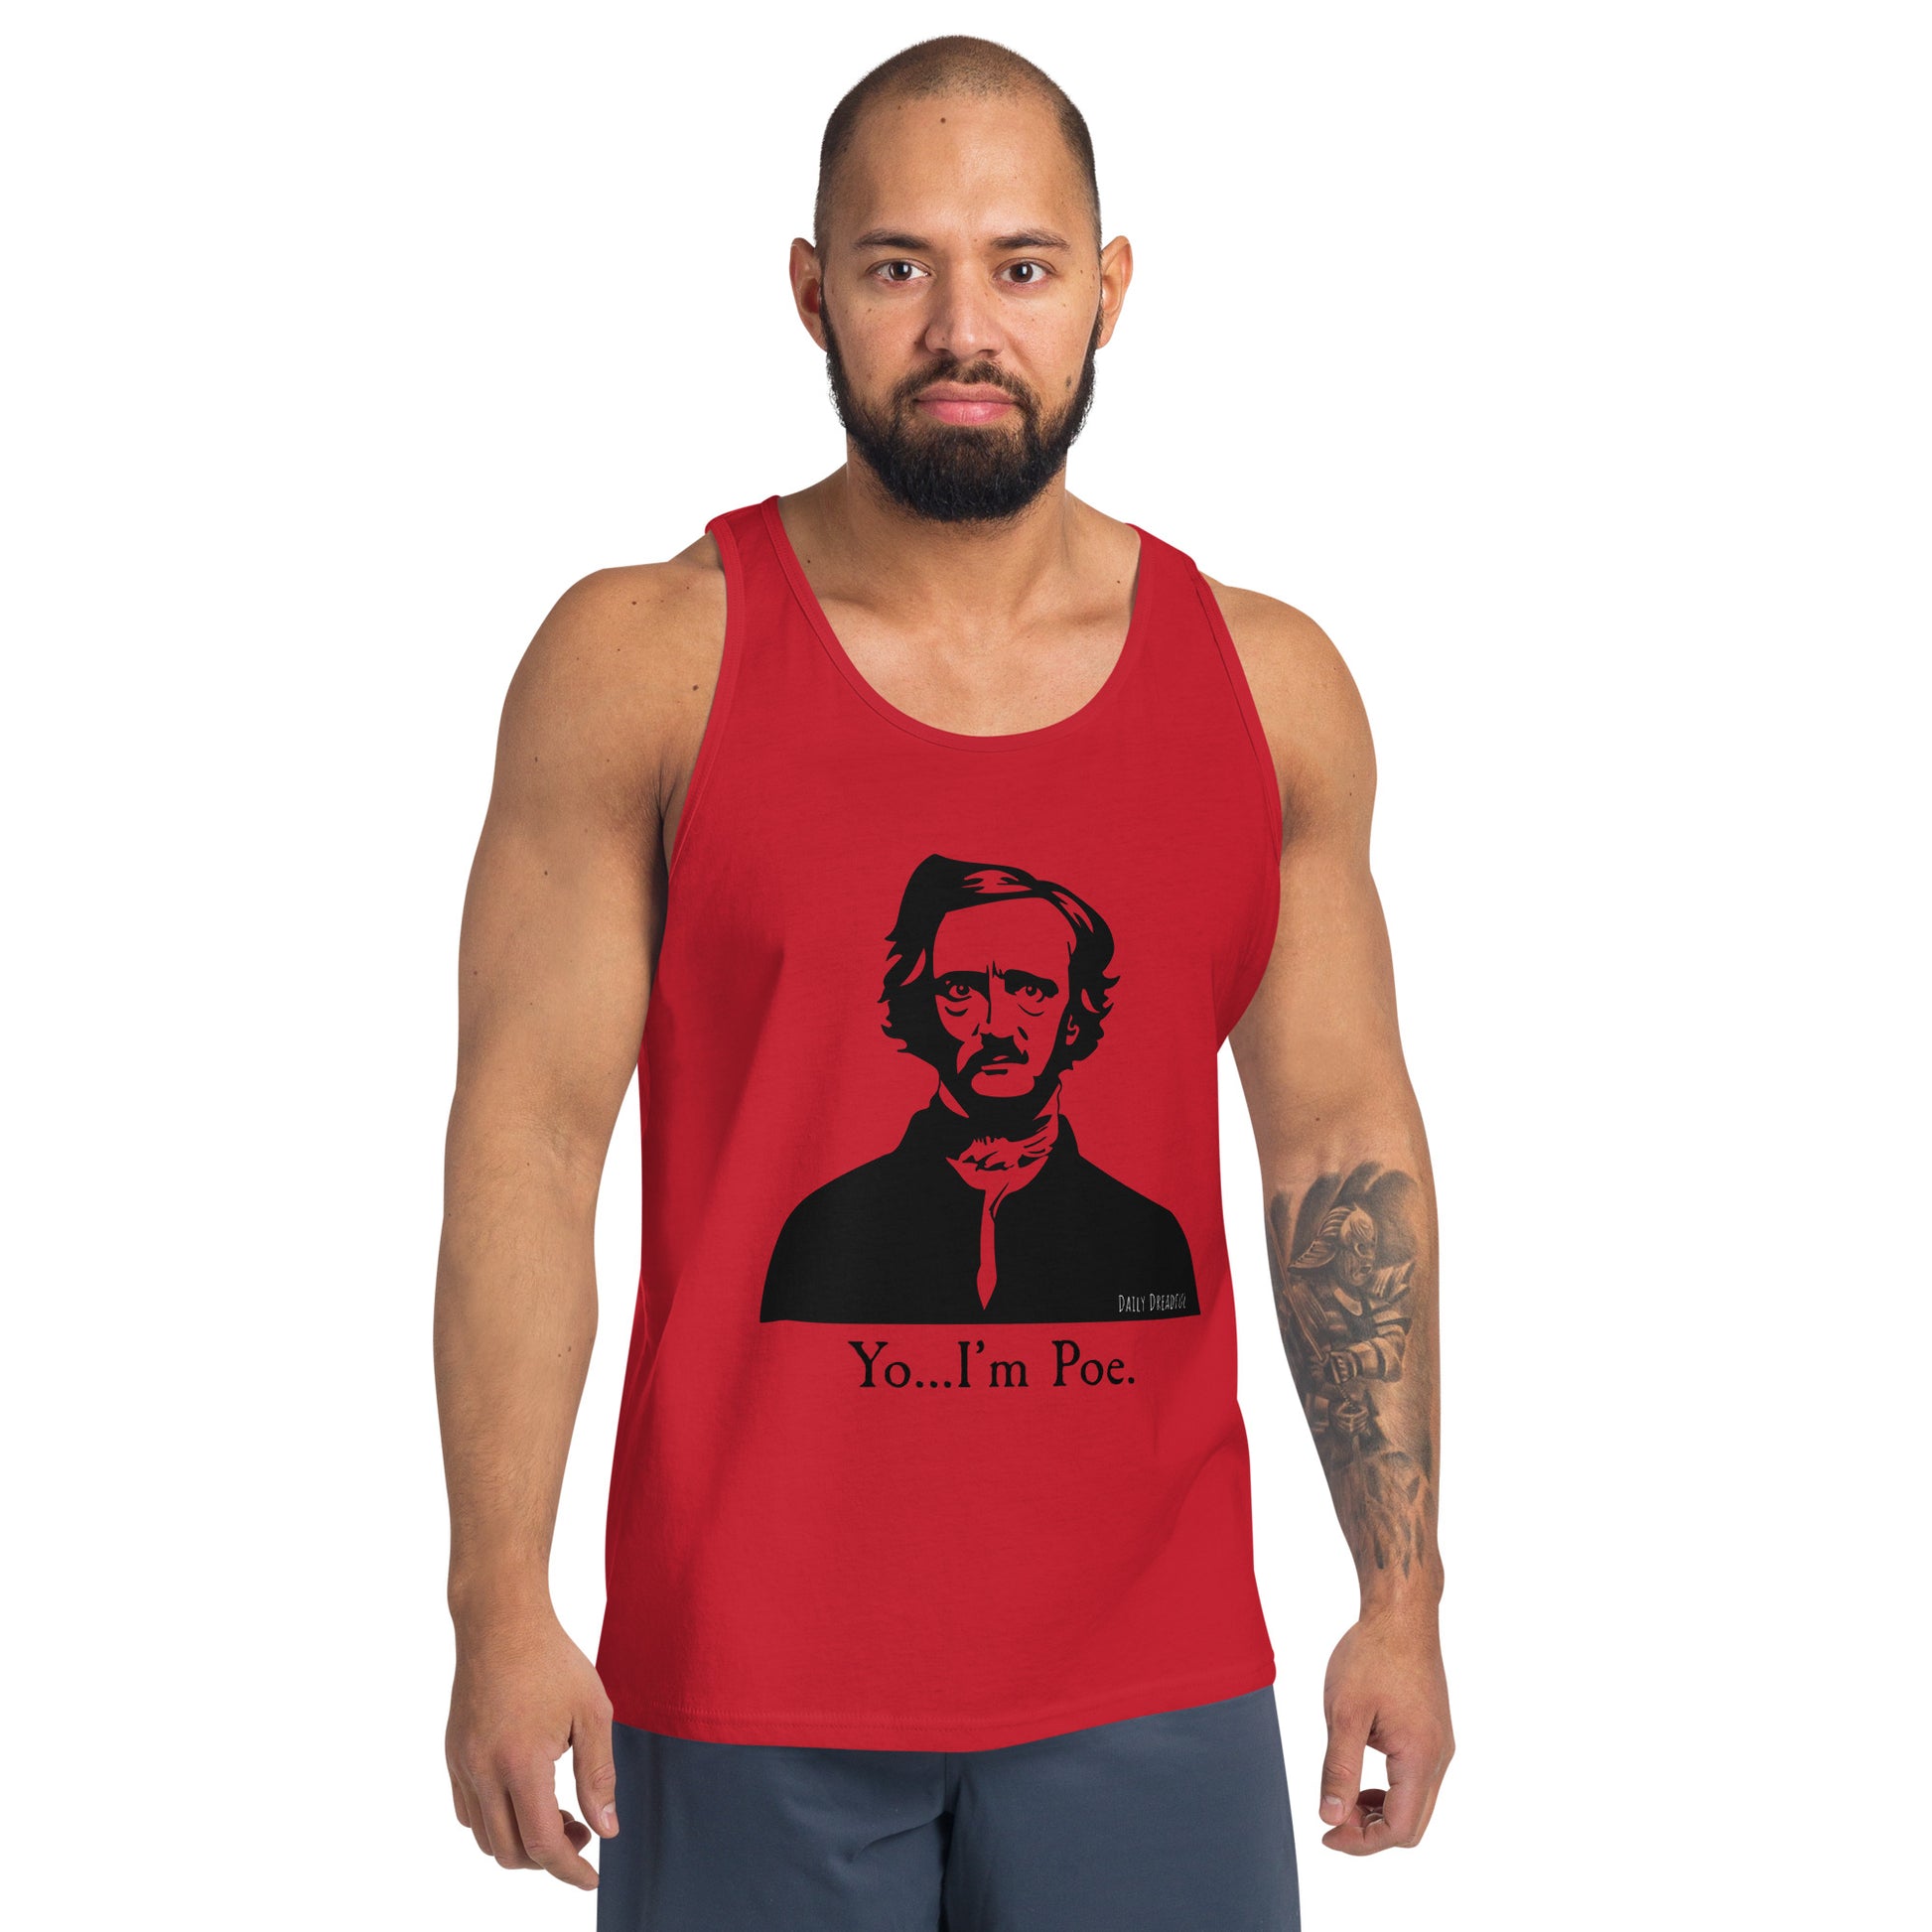 red "Yo I'm Poe" Men's Tank Top from Daily Dreadful